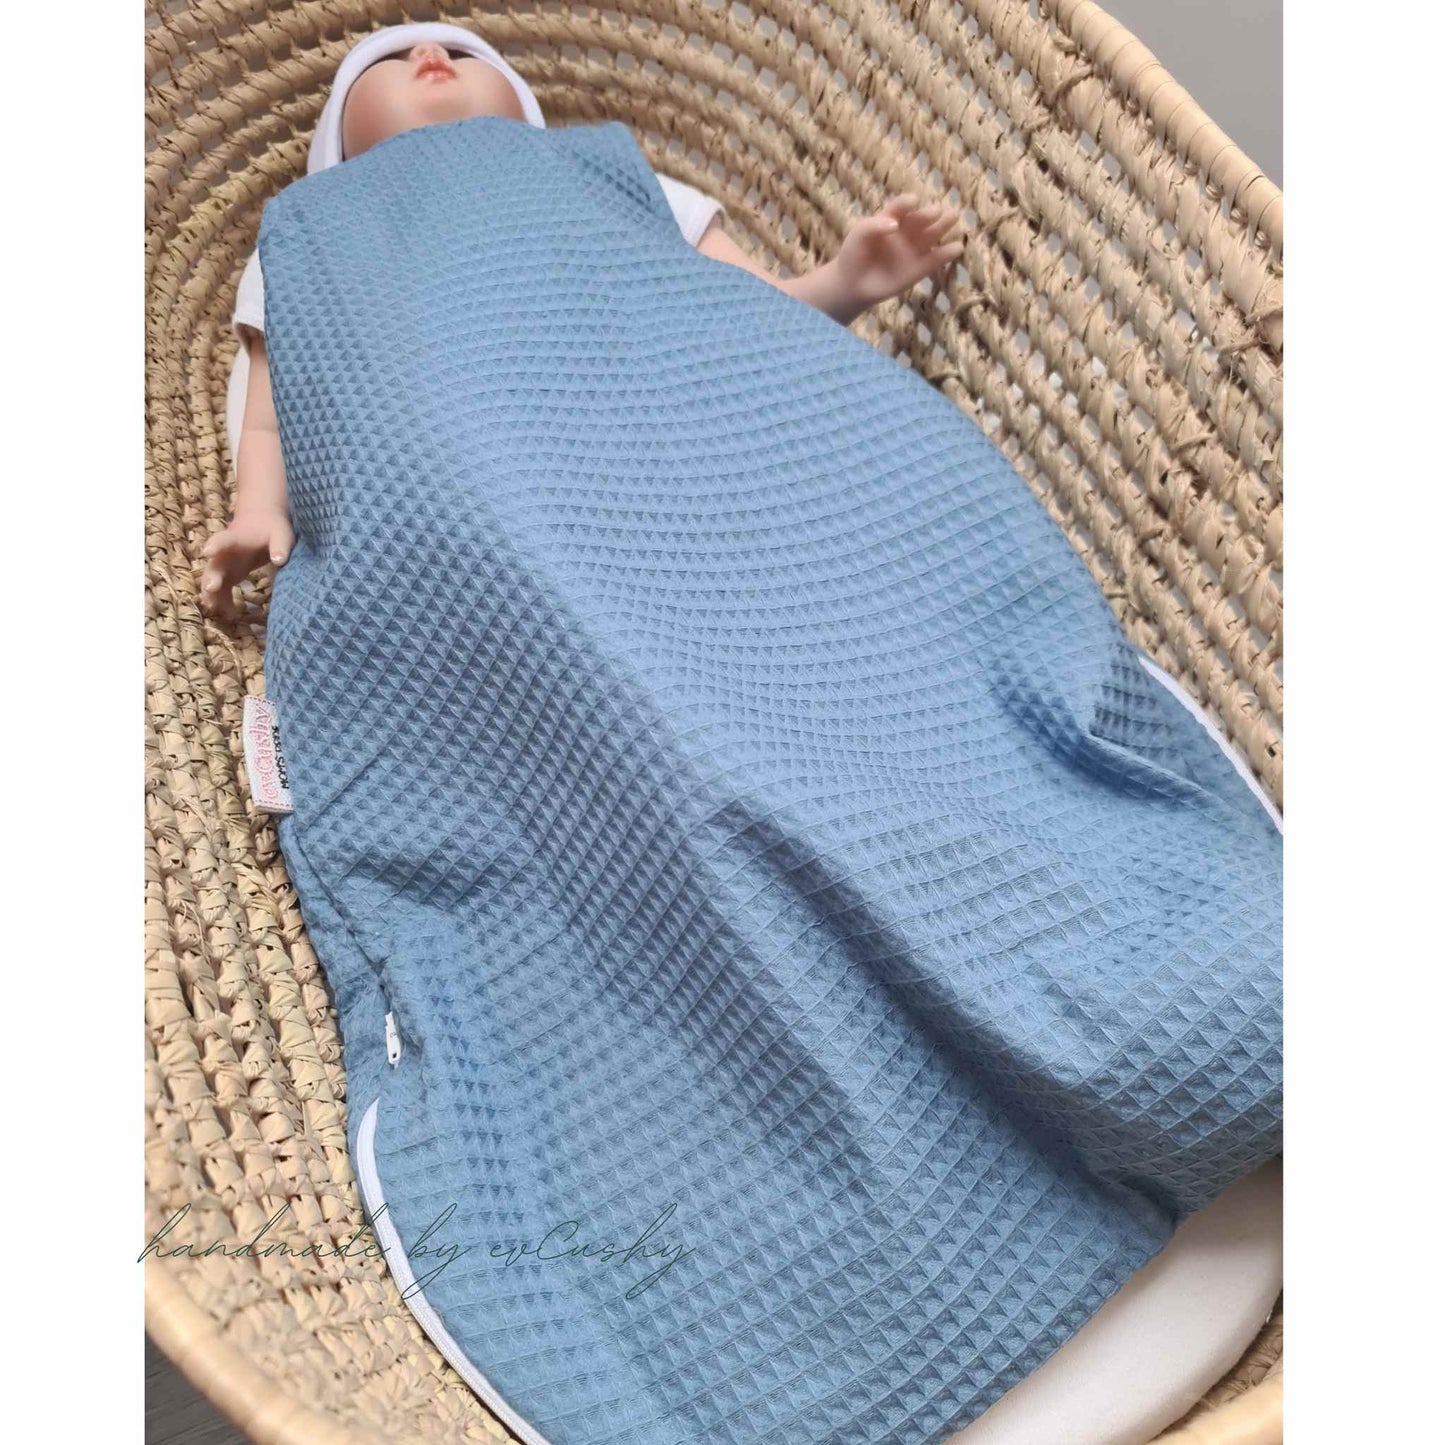 plain sleeping bag for baby  blue, in moses basket 100% cotton 0-6 months in Ireland